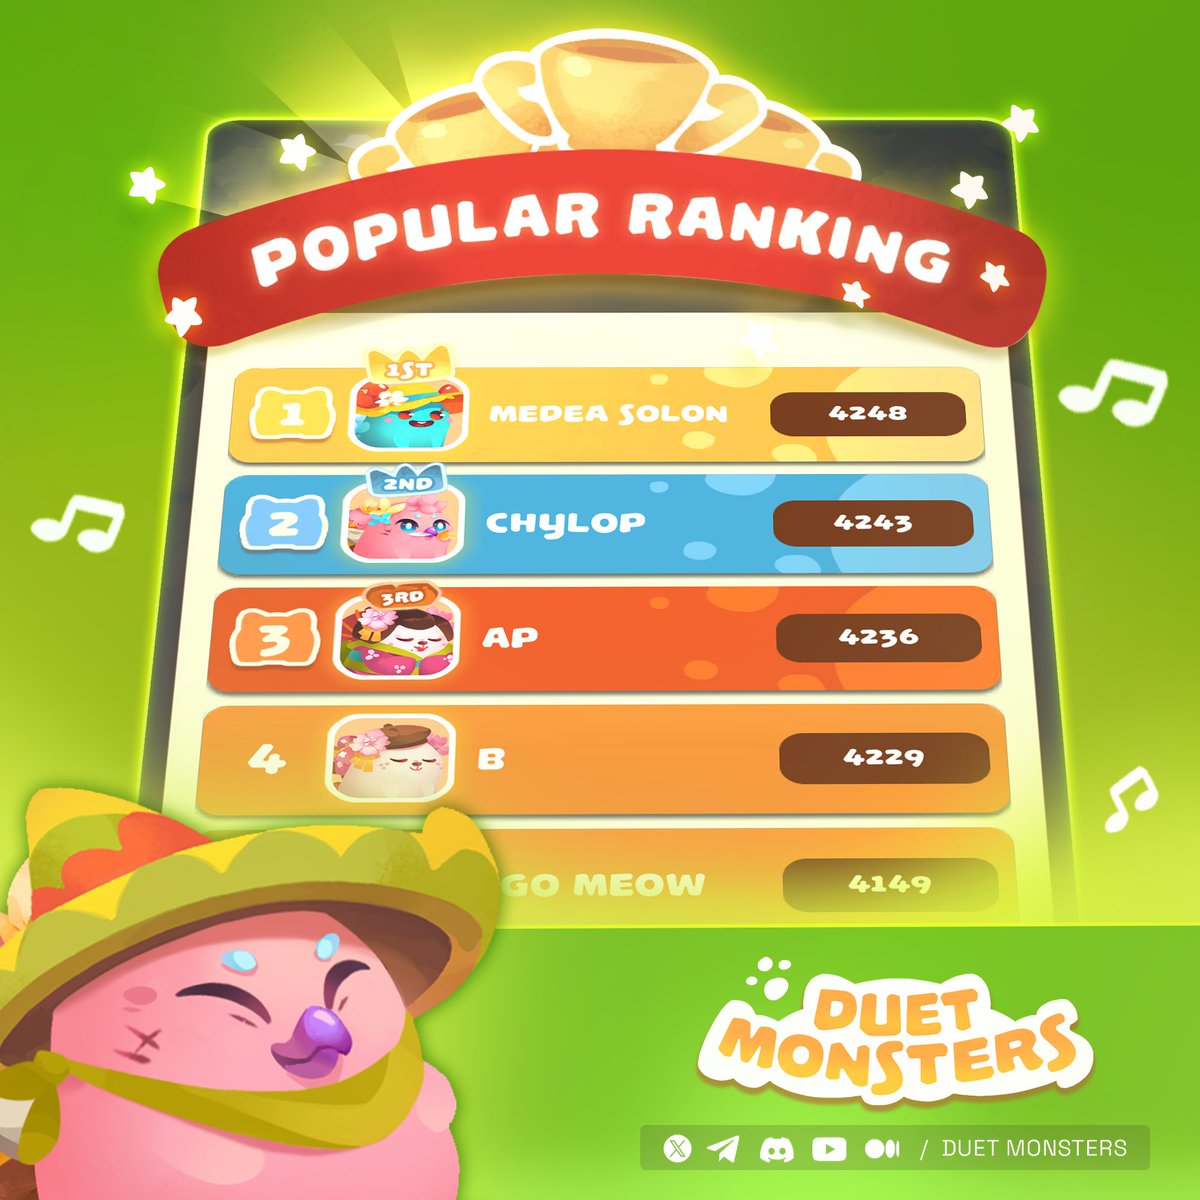 ⚡️The competition in the Duet Monsters Alpha Release Tournament is fierce! Day 3 of 7 came to a close with a completely new set of top 3 players in the lead for grand rewards of Origin Axie NFTs. We'll see who becomes the champs at the end! There's still time to hop into Duet